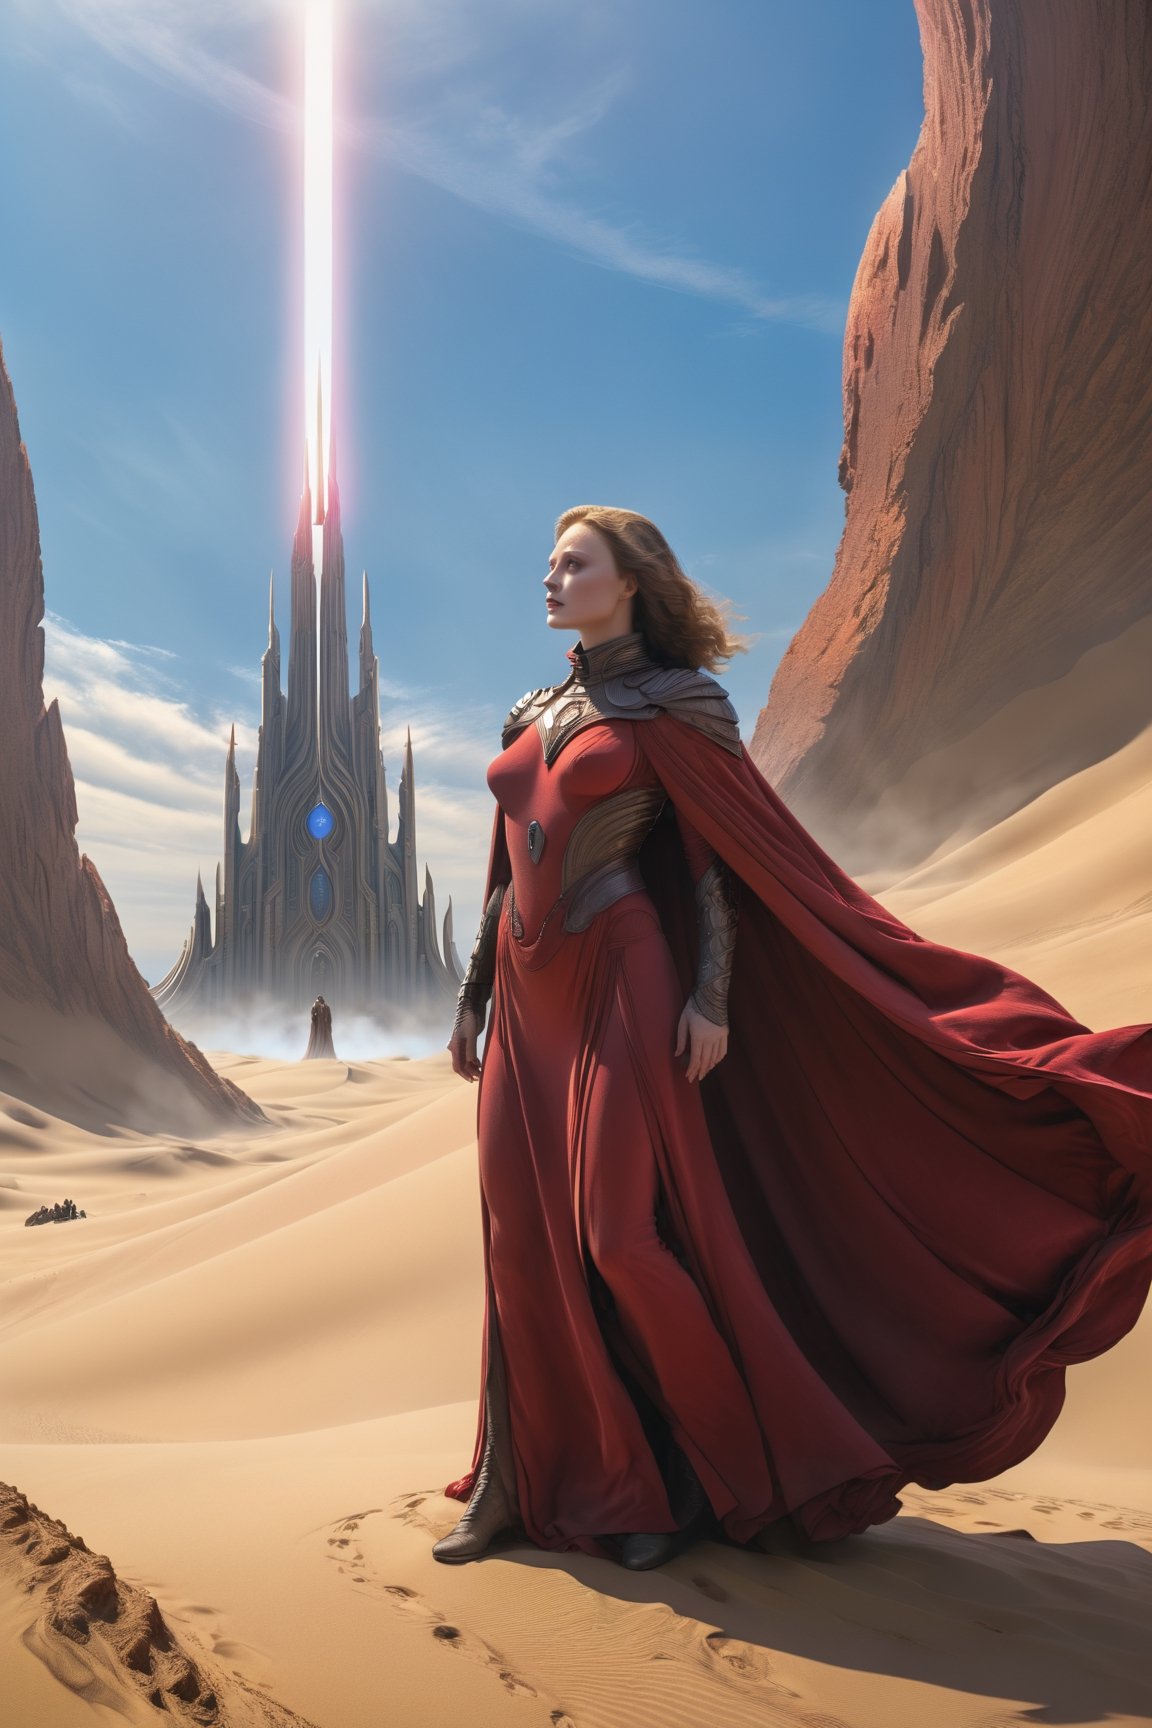 (Best quality), (masterpiece), (ultra detailed), (high detailed), (extremely detailed), Dune concept art, Clean and neat tones, Sci-fi base scene, Huge scene, a character from dune movie, a woman in a red dress standing in a church, light blue eyes, standing, outdoors, sky, day, cape, blue sky, buildings, scenery, cloak, pillar, statue, white cloak , sci fi, Dune style soldiers standing around woman,LegendDarkFantasy